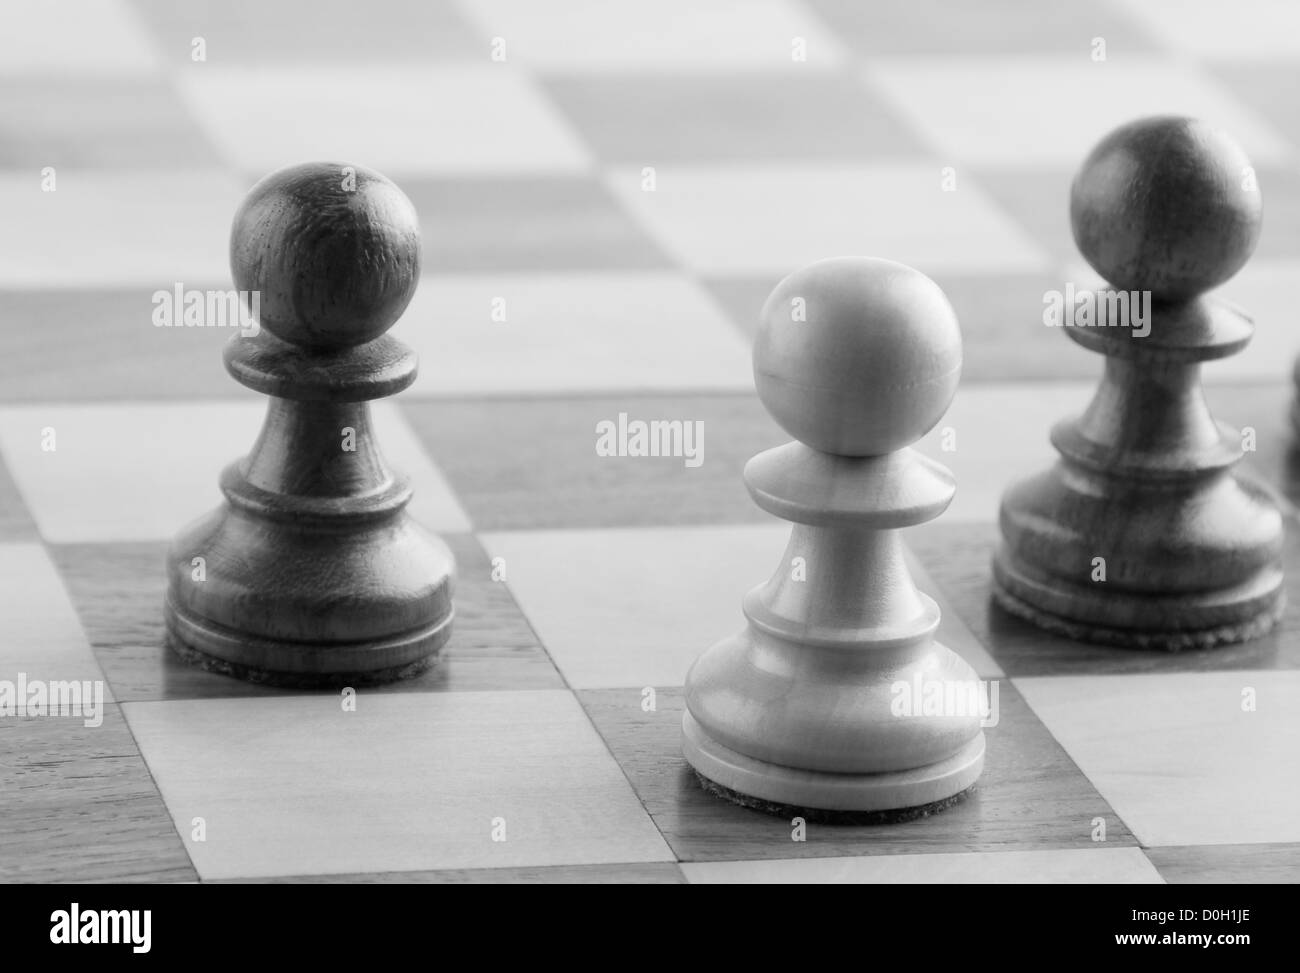 White chess pawn near two black chess pawns on a chess board Stock Photo